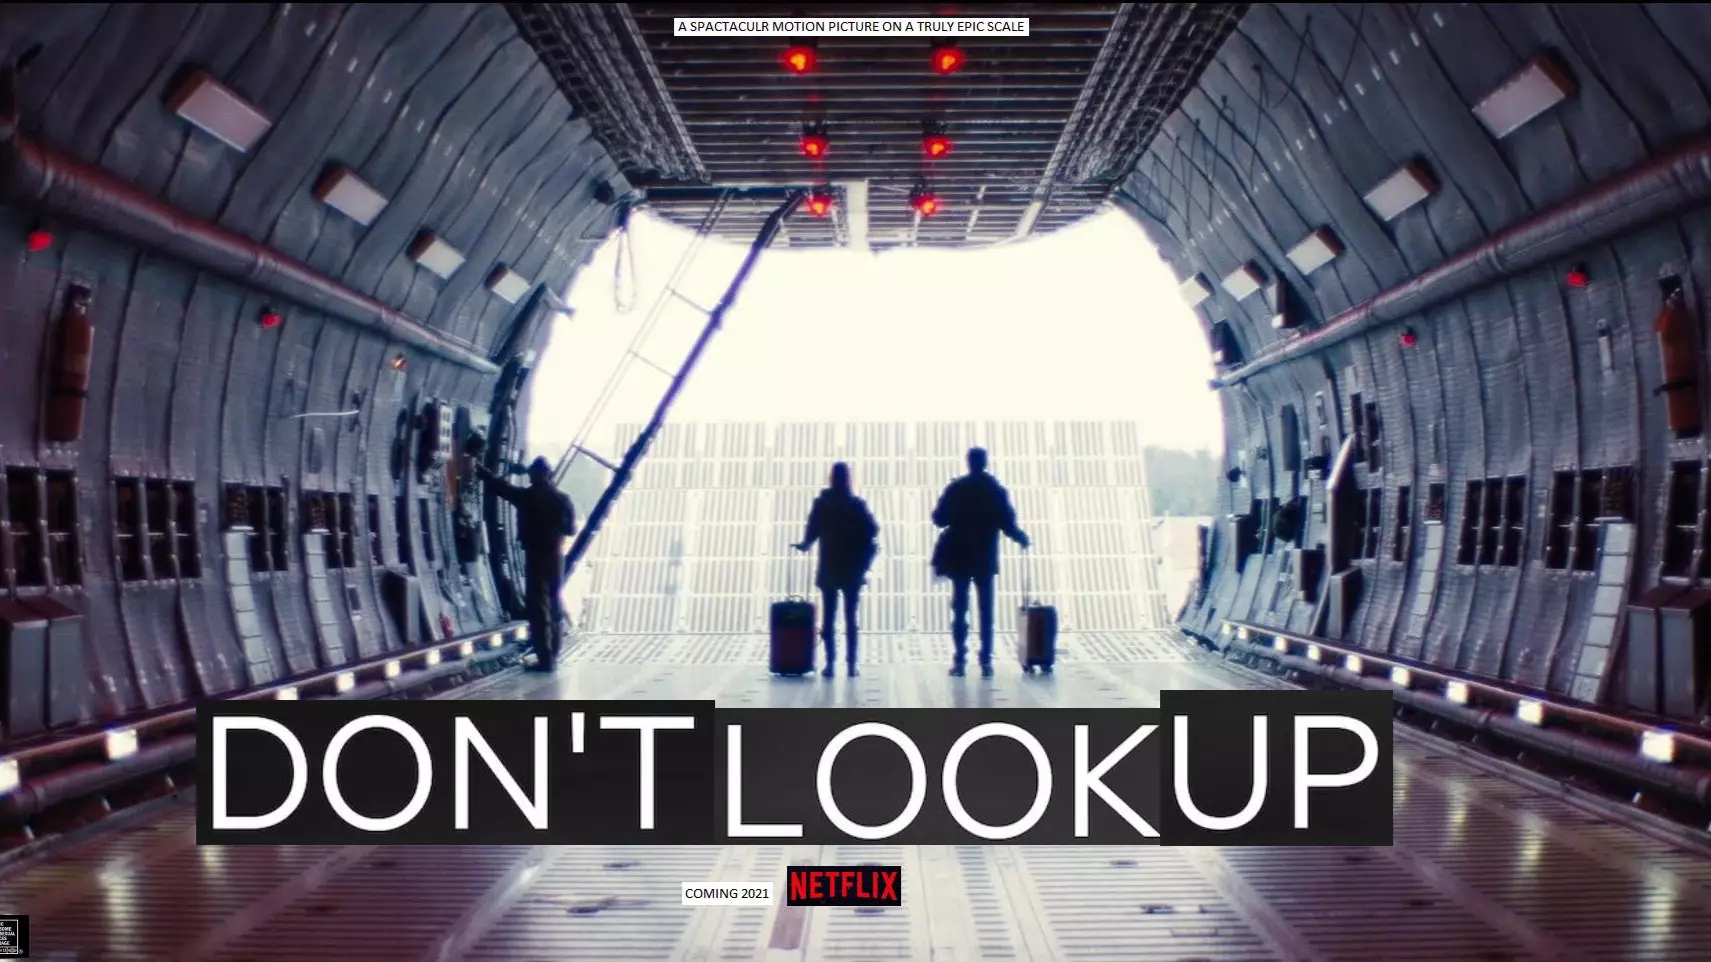 Trailer For Netflix's Don't Look Up Showcases One Of The Biggest Casts Ever